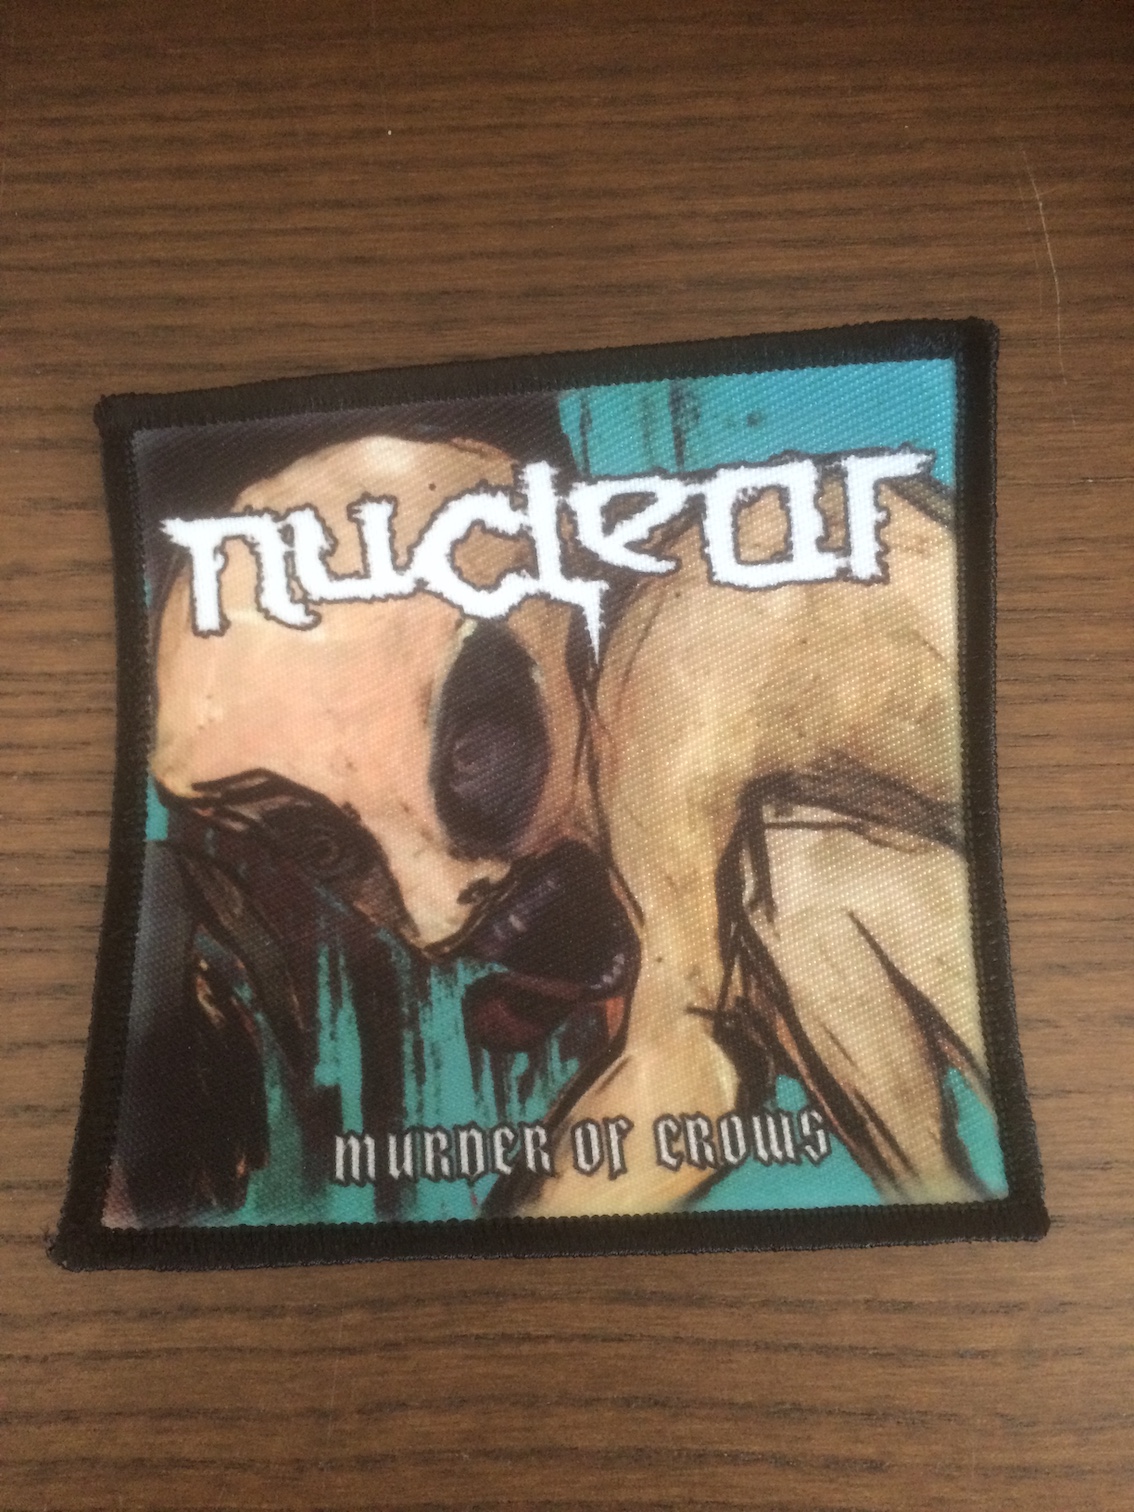 NUCLEAR - Murder Of Crows (printed) Patch